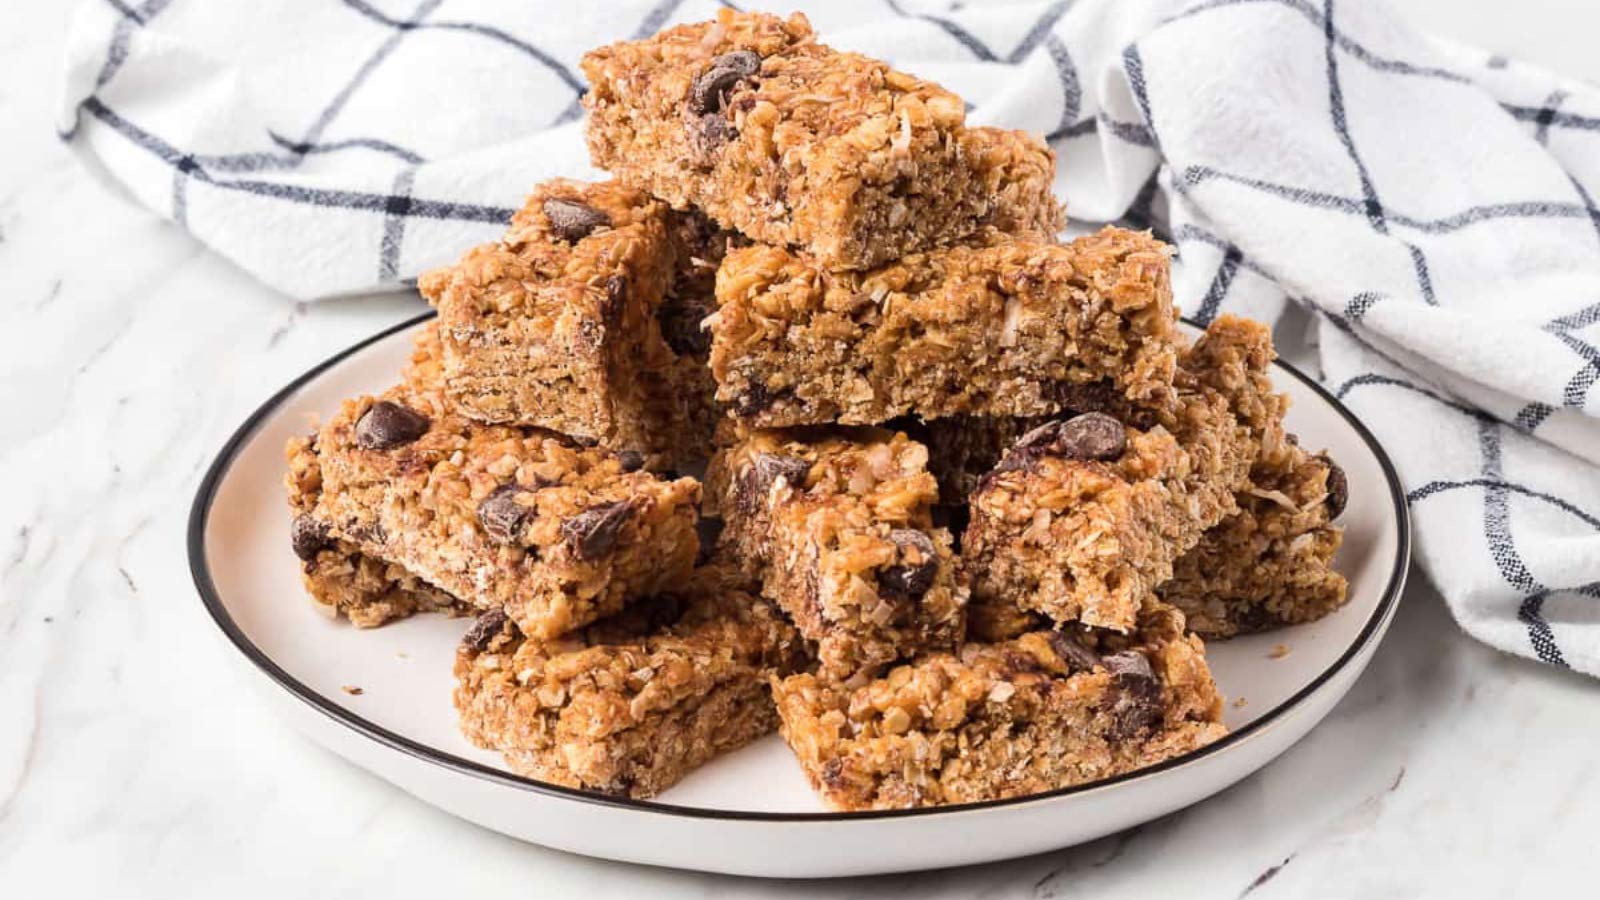 <p><a href="https://www.365daysofbakingandmore.com/no-bake-rice-krispies-granola-bars/" rel="external noopener noreferrer" title=" External link. Opens in a new tab.">No-bake Rice Krispies granola bars</a> are so easy to make, and they taste great, too. They are soft, crunchy, and sweet enough to satisfy your cravings. They are the perfect snack to take along on road trips and hikes or to pack in a lunch box. </p>